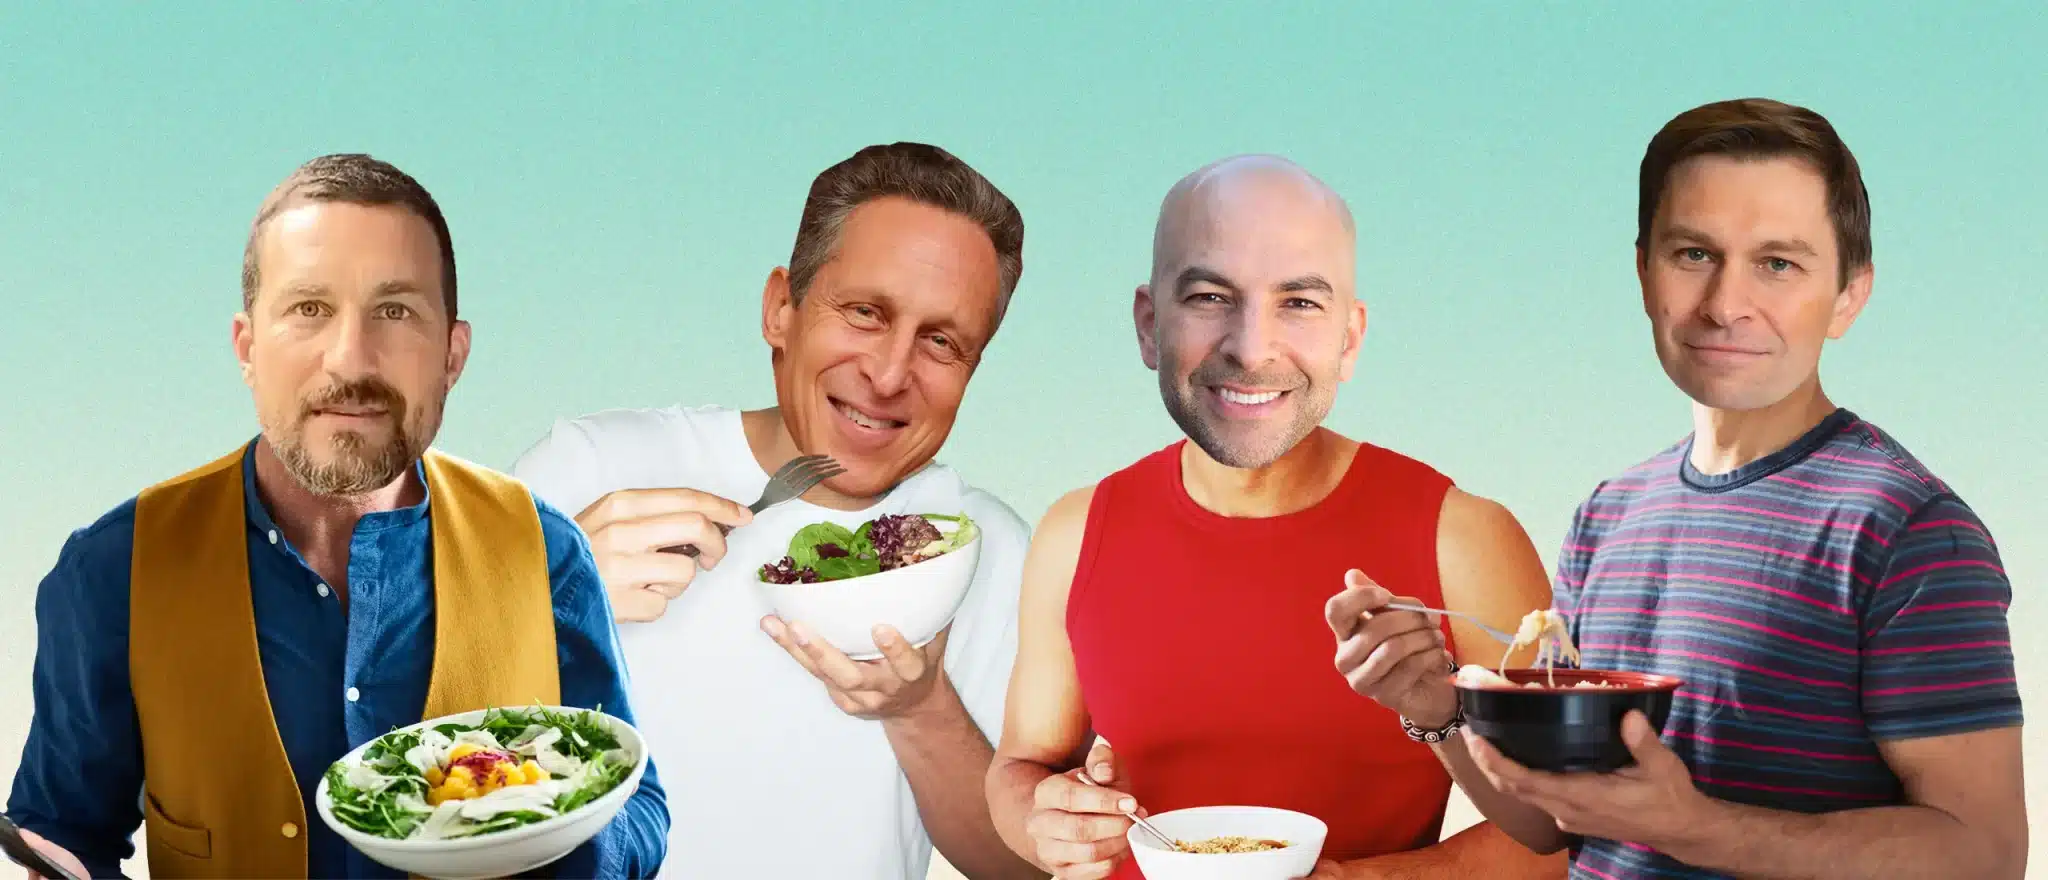 Longevity Experts Swear By These Diets for a Longer, Healthier Life